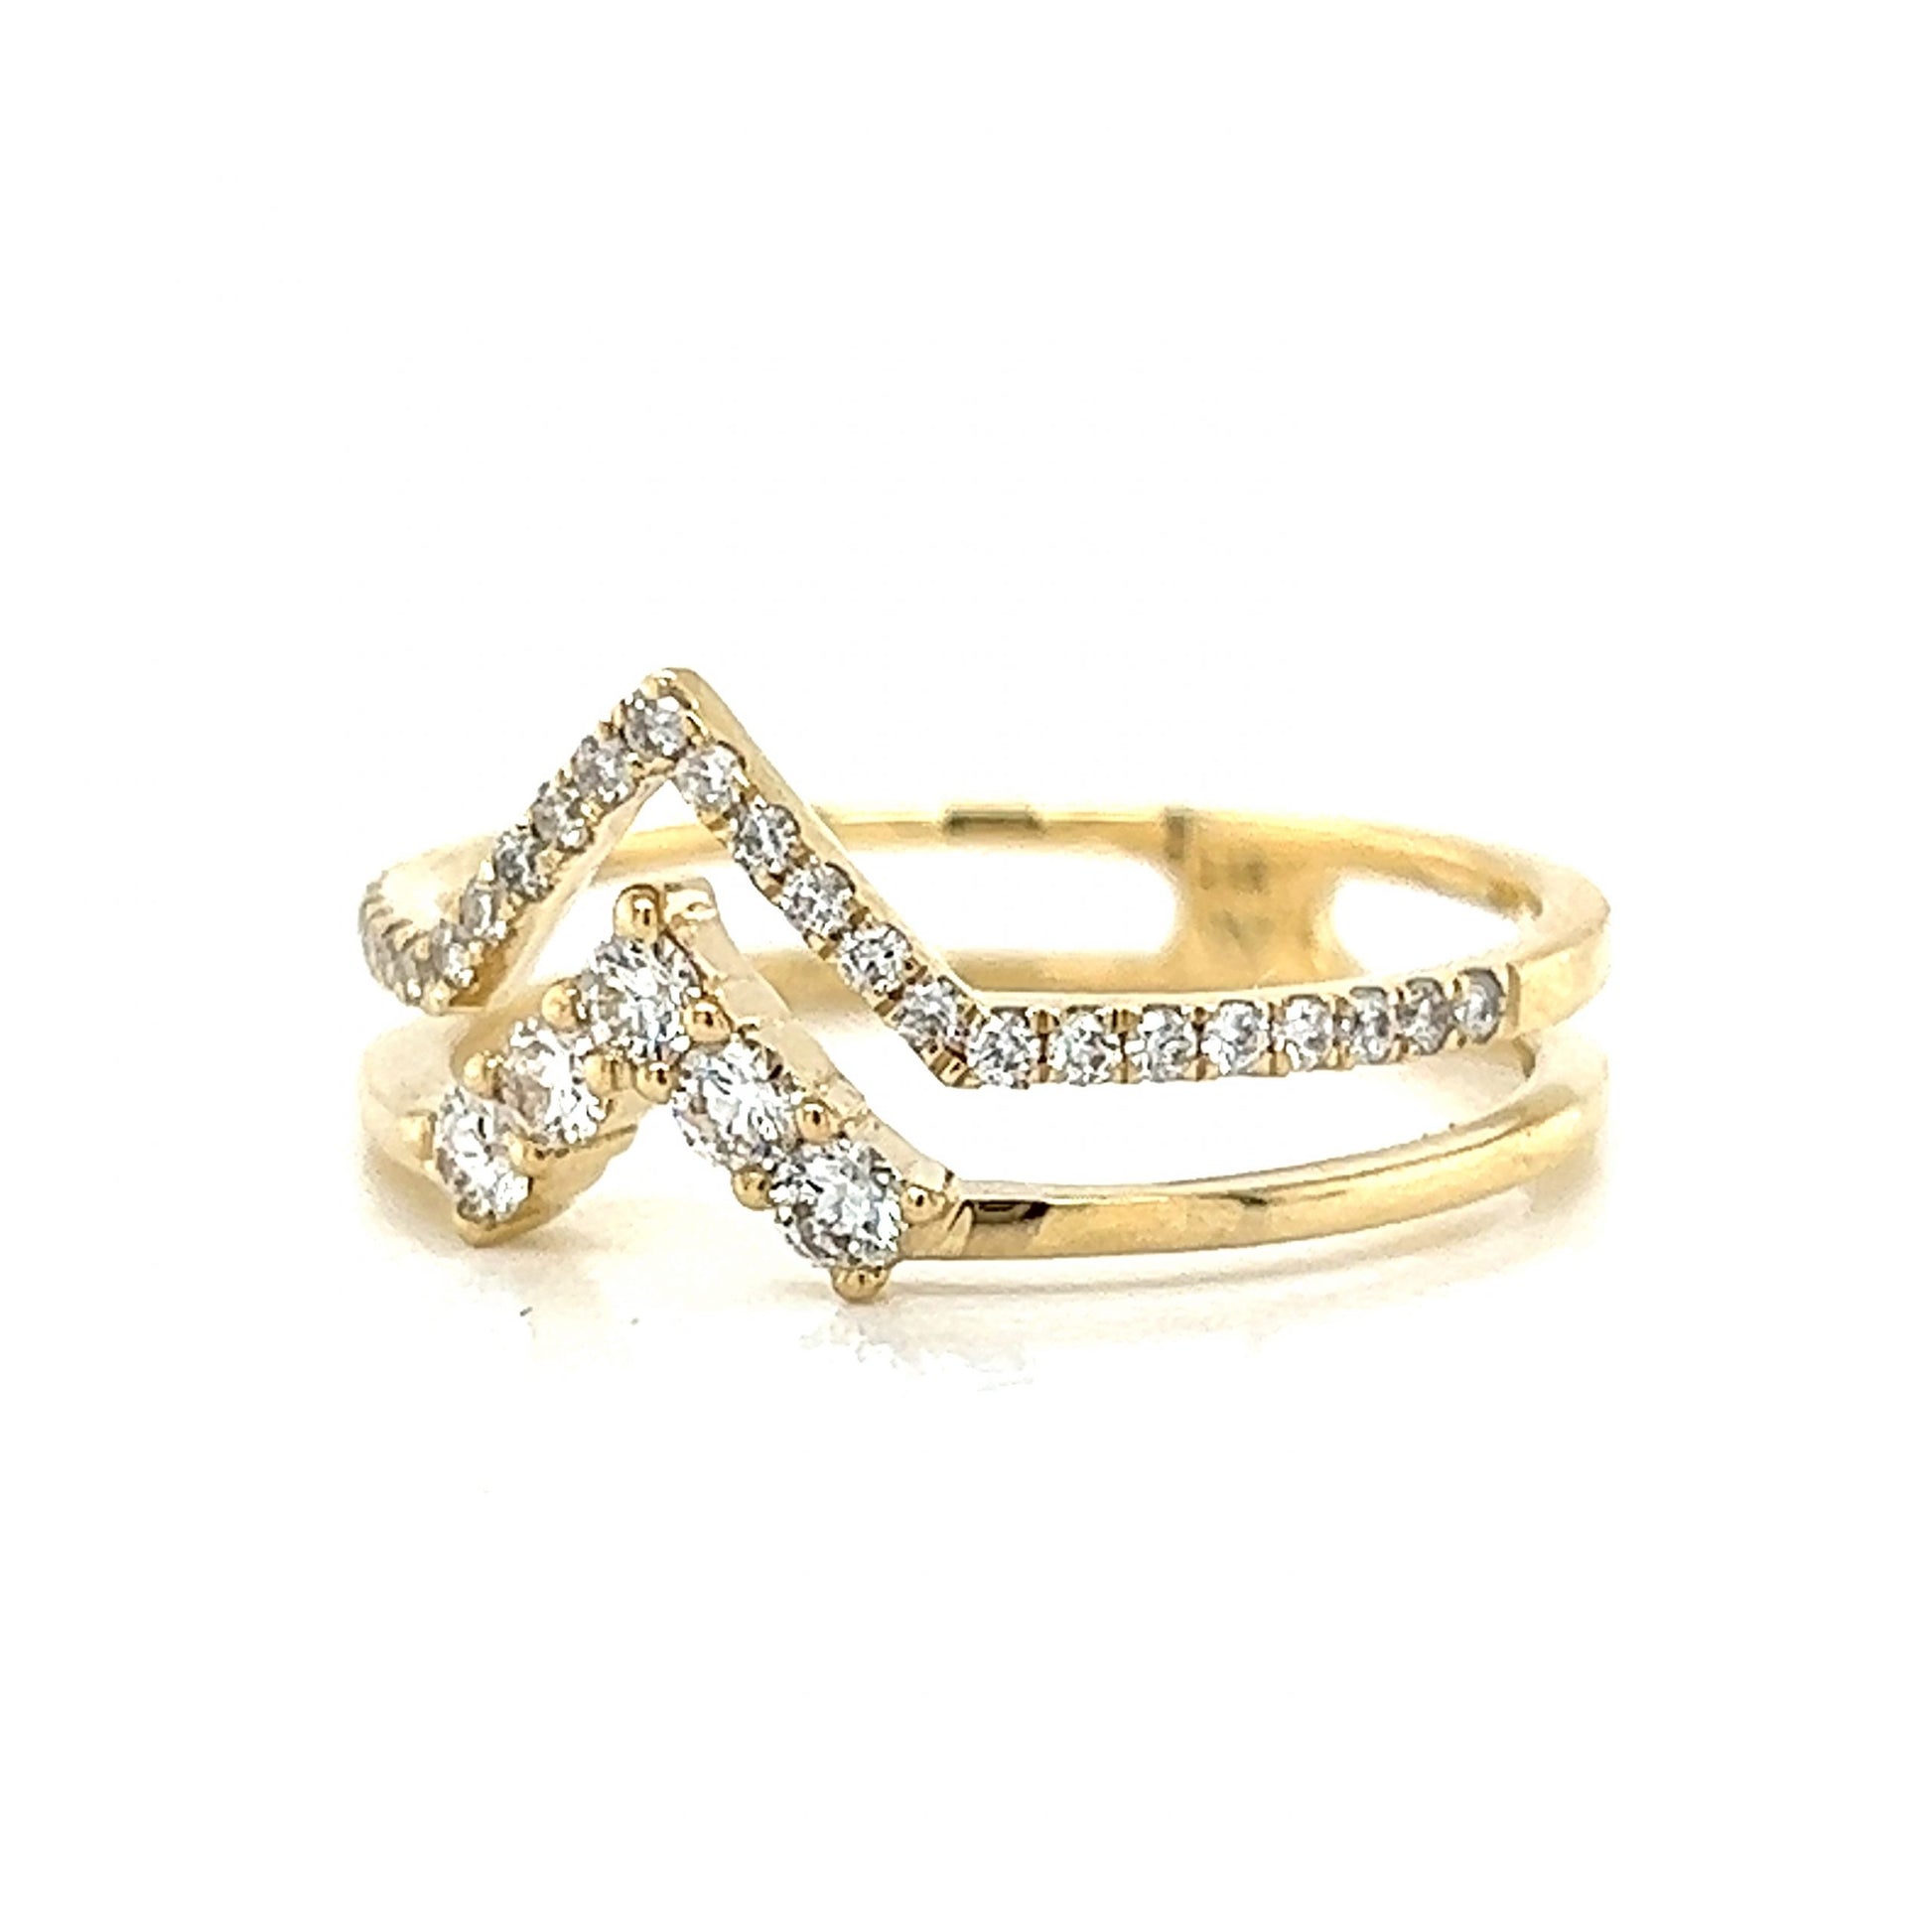 Stacked Contoured Diamond Wedding Band in 14k Yellow GoldComposition: 14 Karat Yellow GoldRing Size: 6.5Total Diamond Weight: .35 ctTotal Gram Weight: 2.2 gInscription: 14k